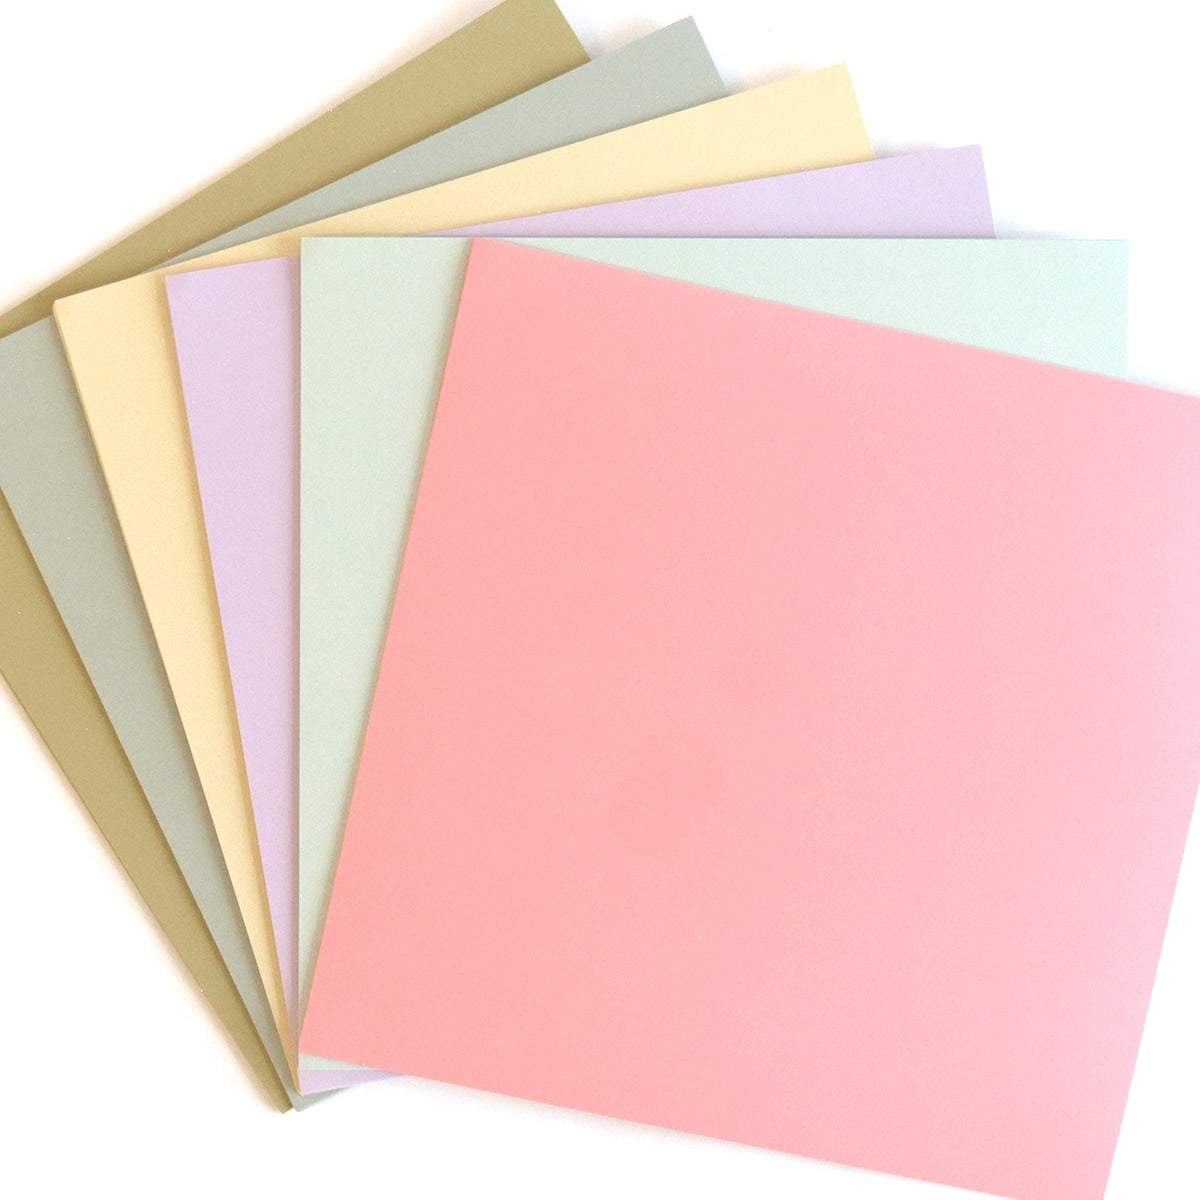 a stack of pastel colored paper on a white background.